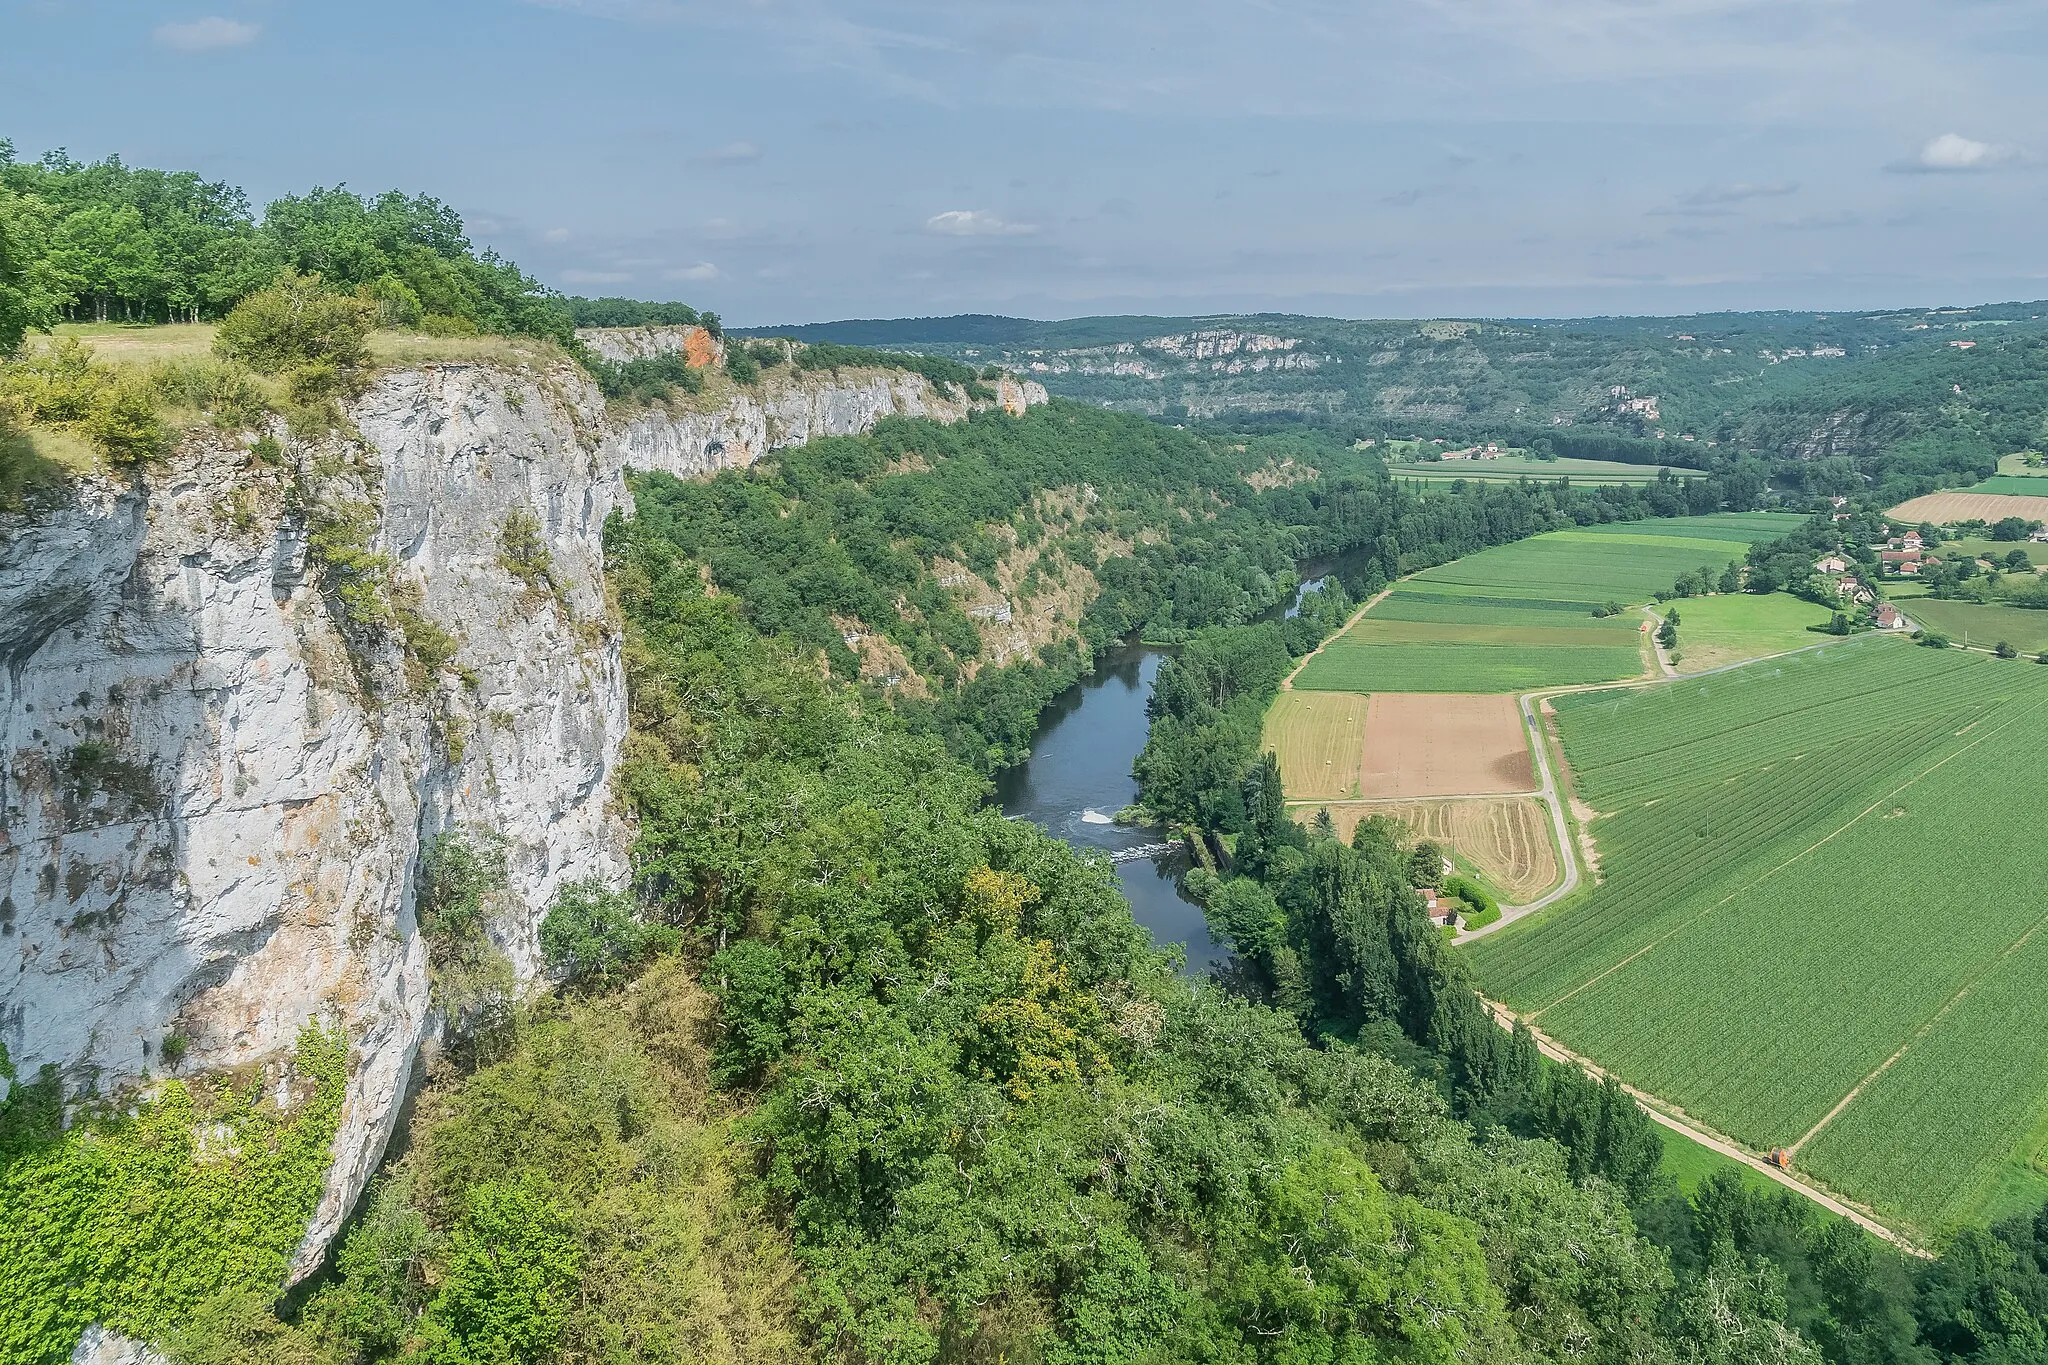 Photo showing: View of Lot River from Saut de la Mounine, between Aveyron and Lot departments, France